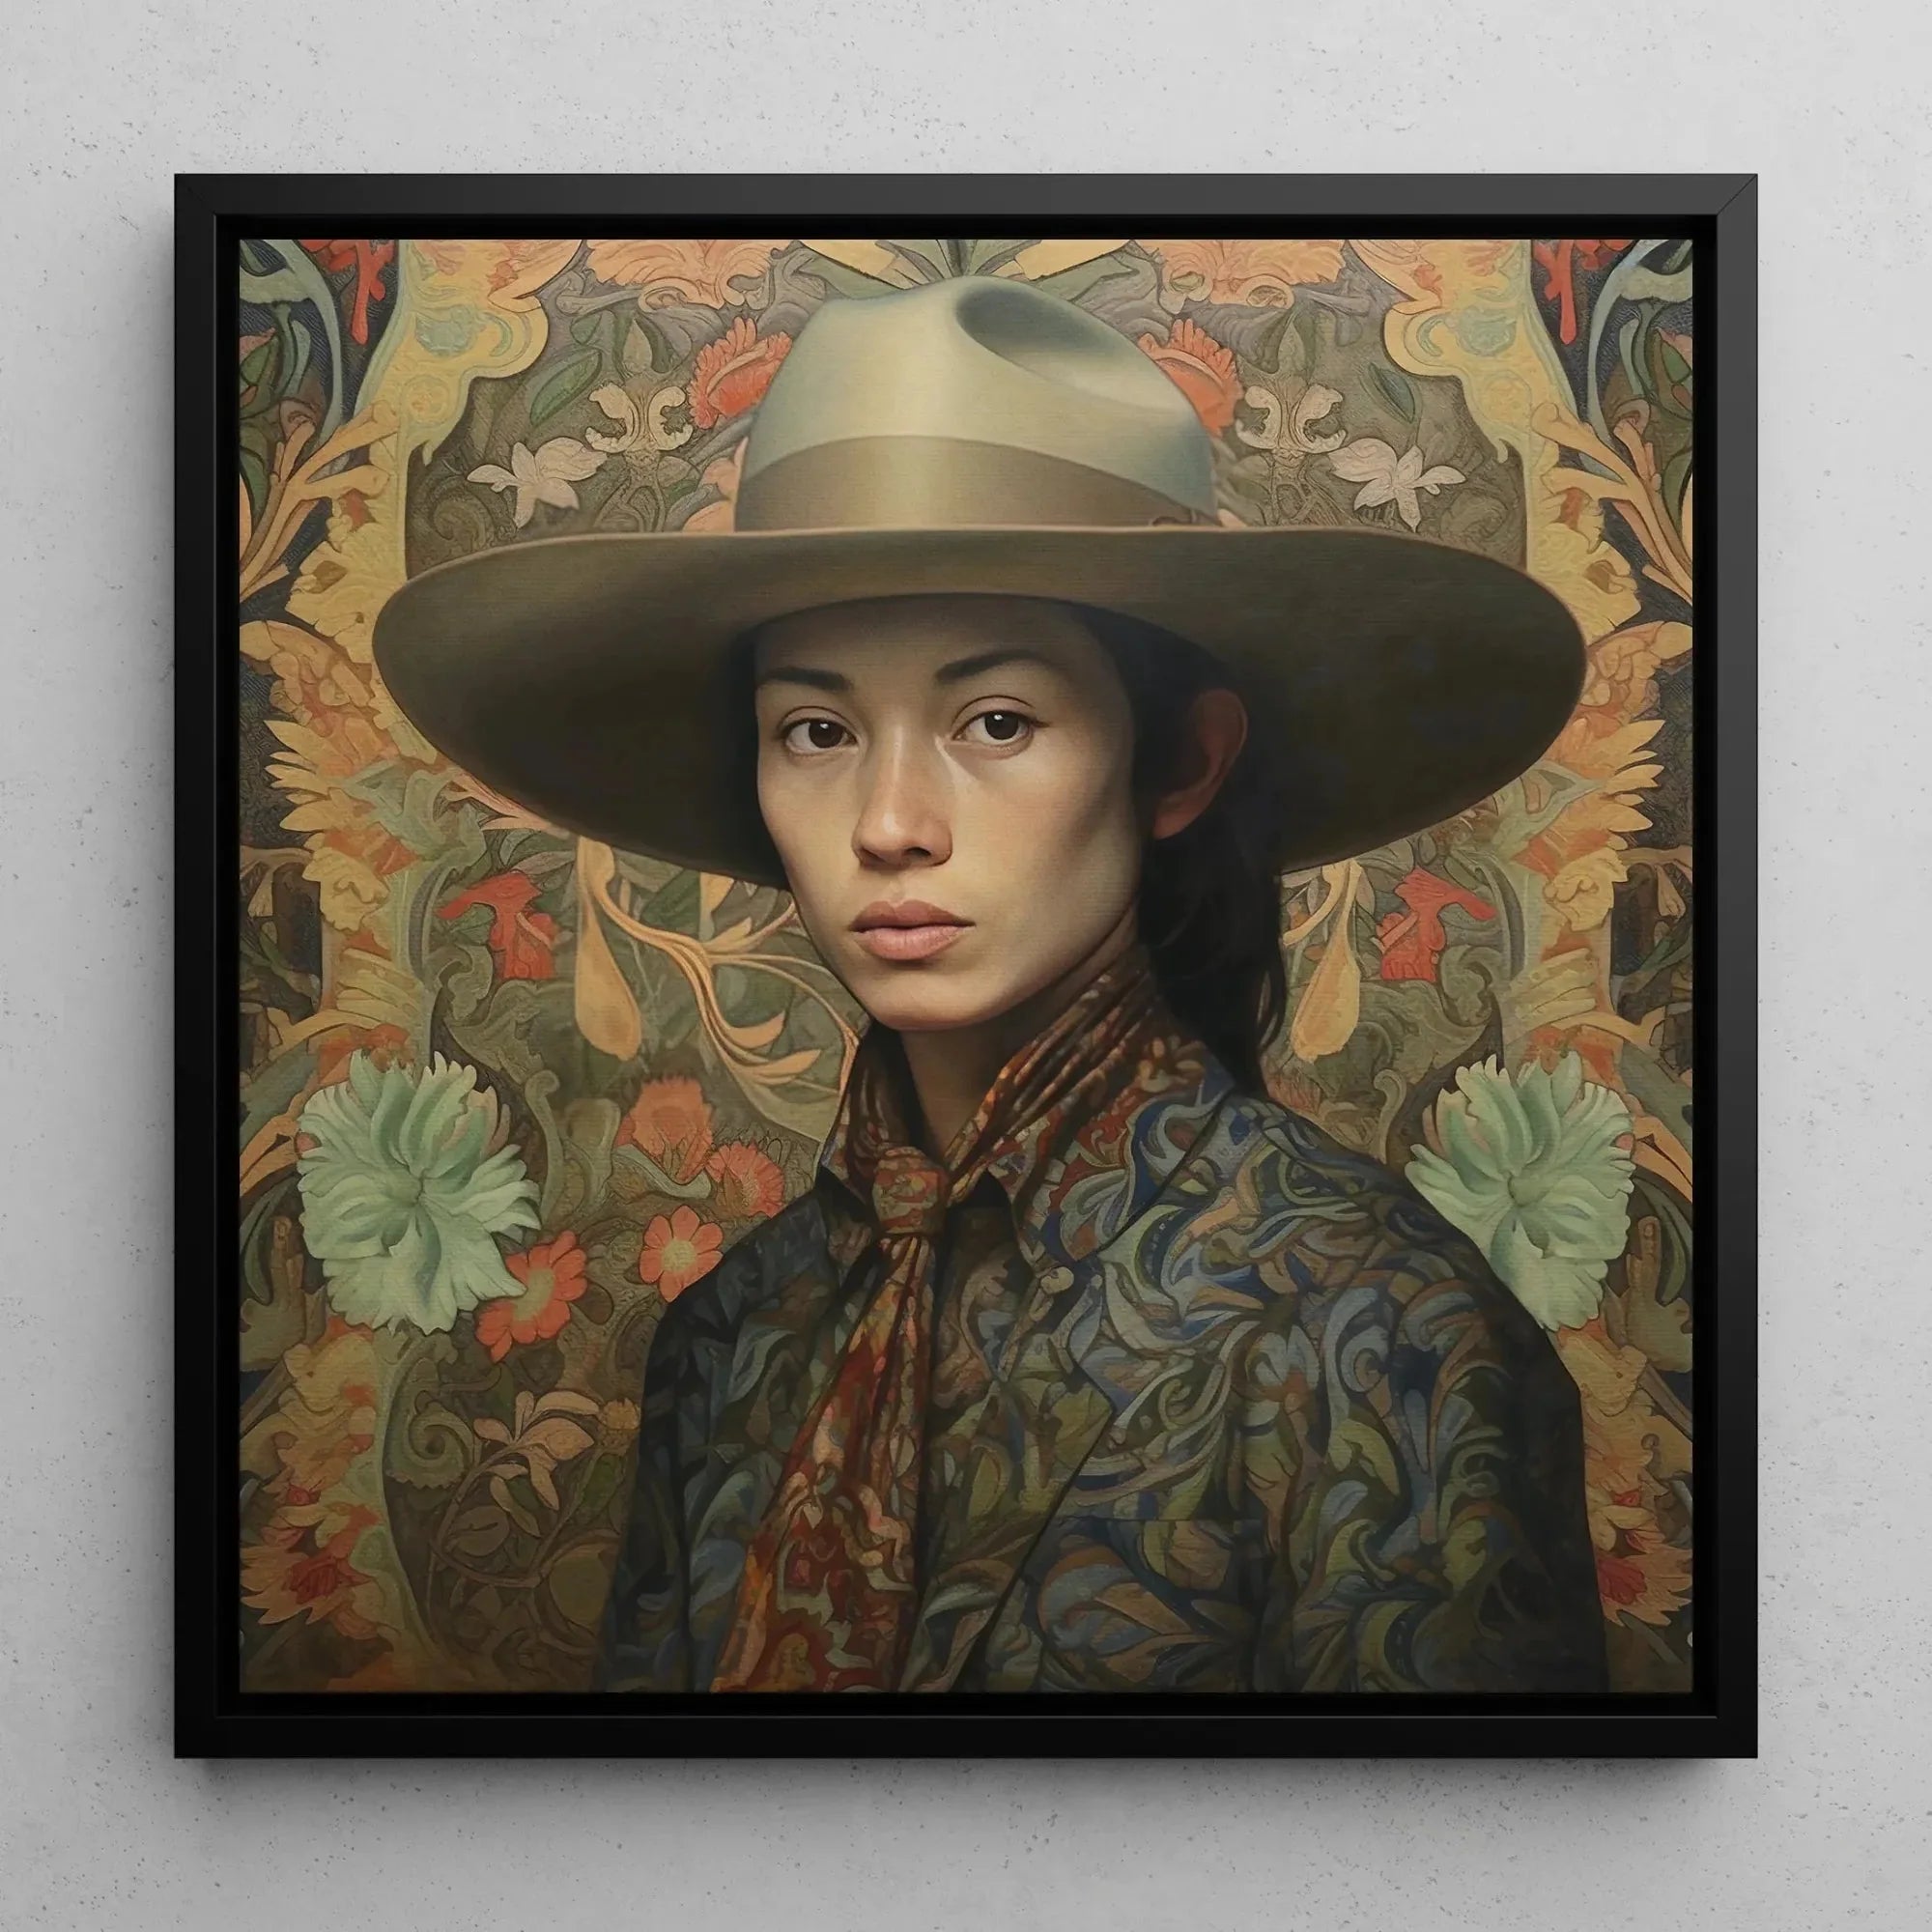 Fulin - Gay Cowboy Framed Canvas - Gaysian Chinese Queerart - 16’x16’ - Posters Prints & Visual Artwork - Aesthetic Art